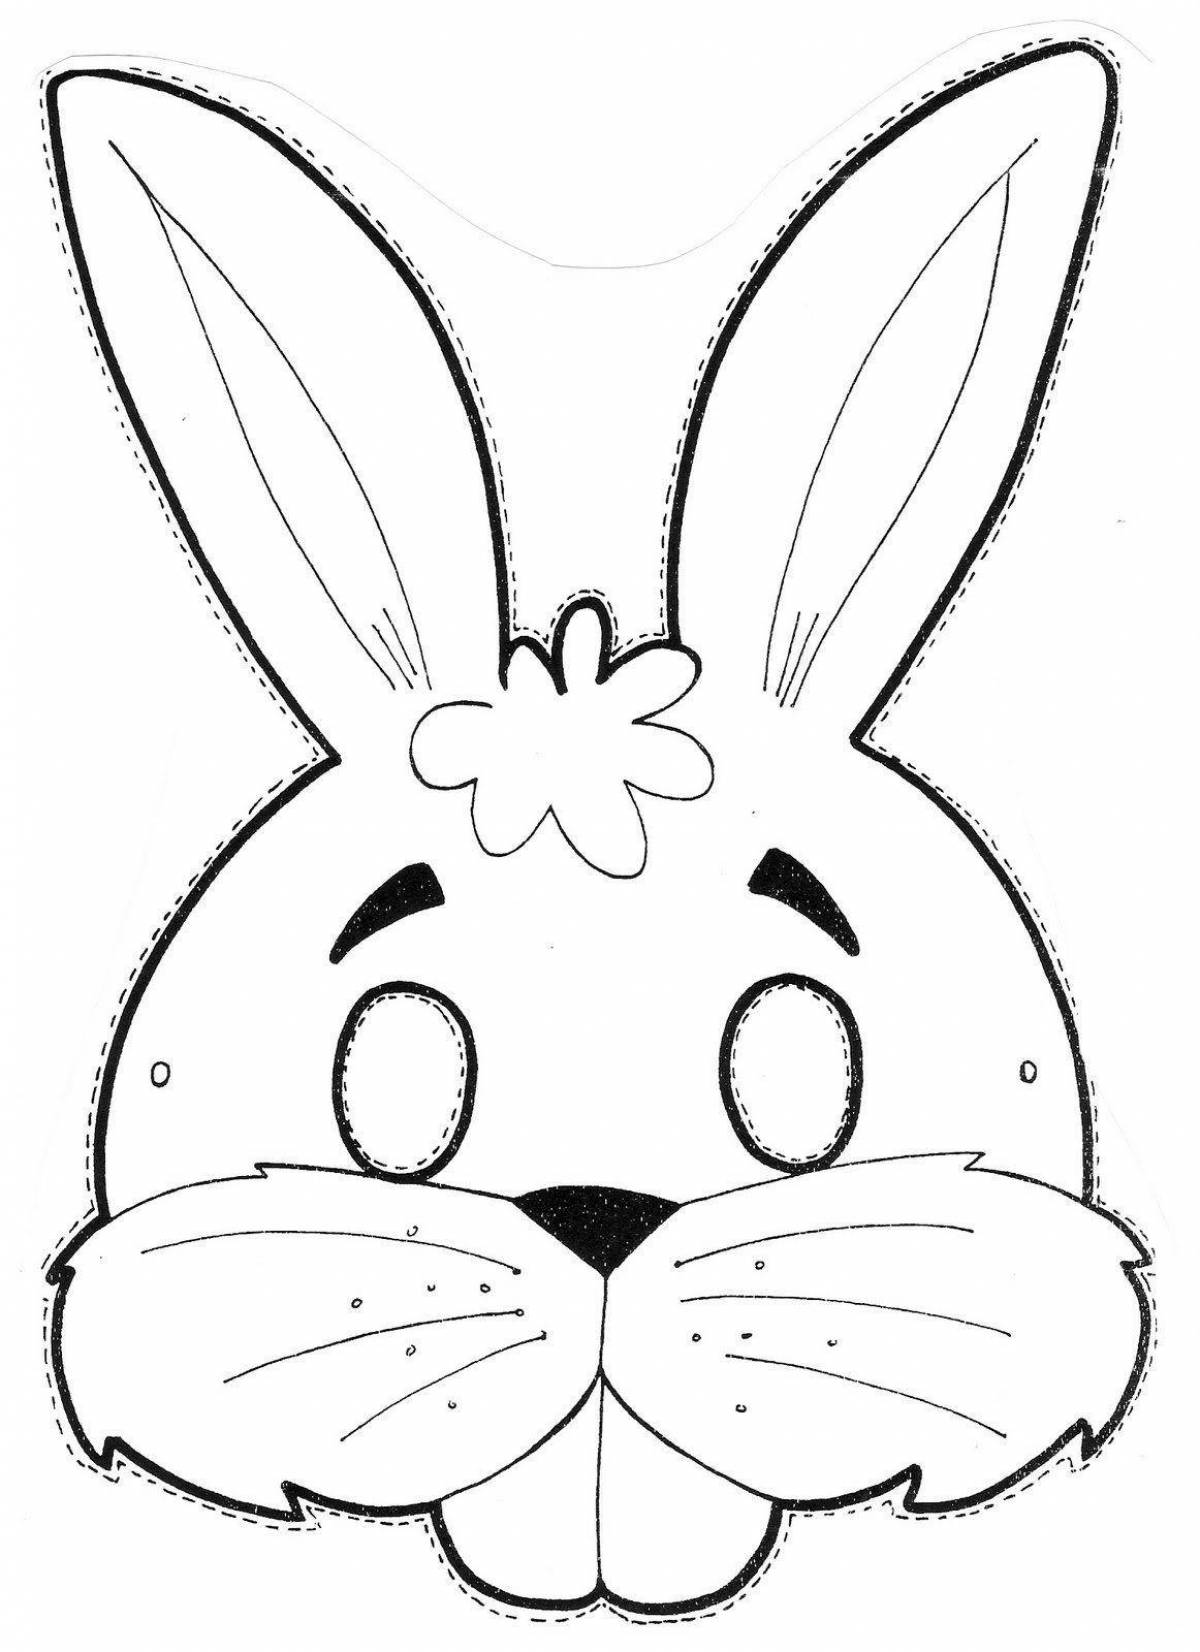 Coloring page beckoning hare mask